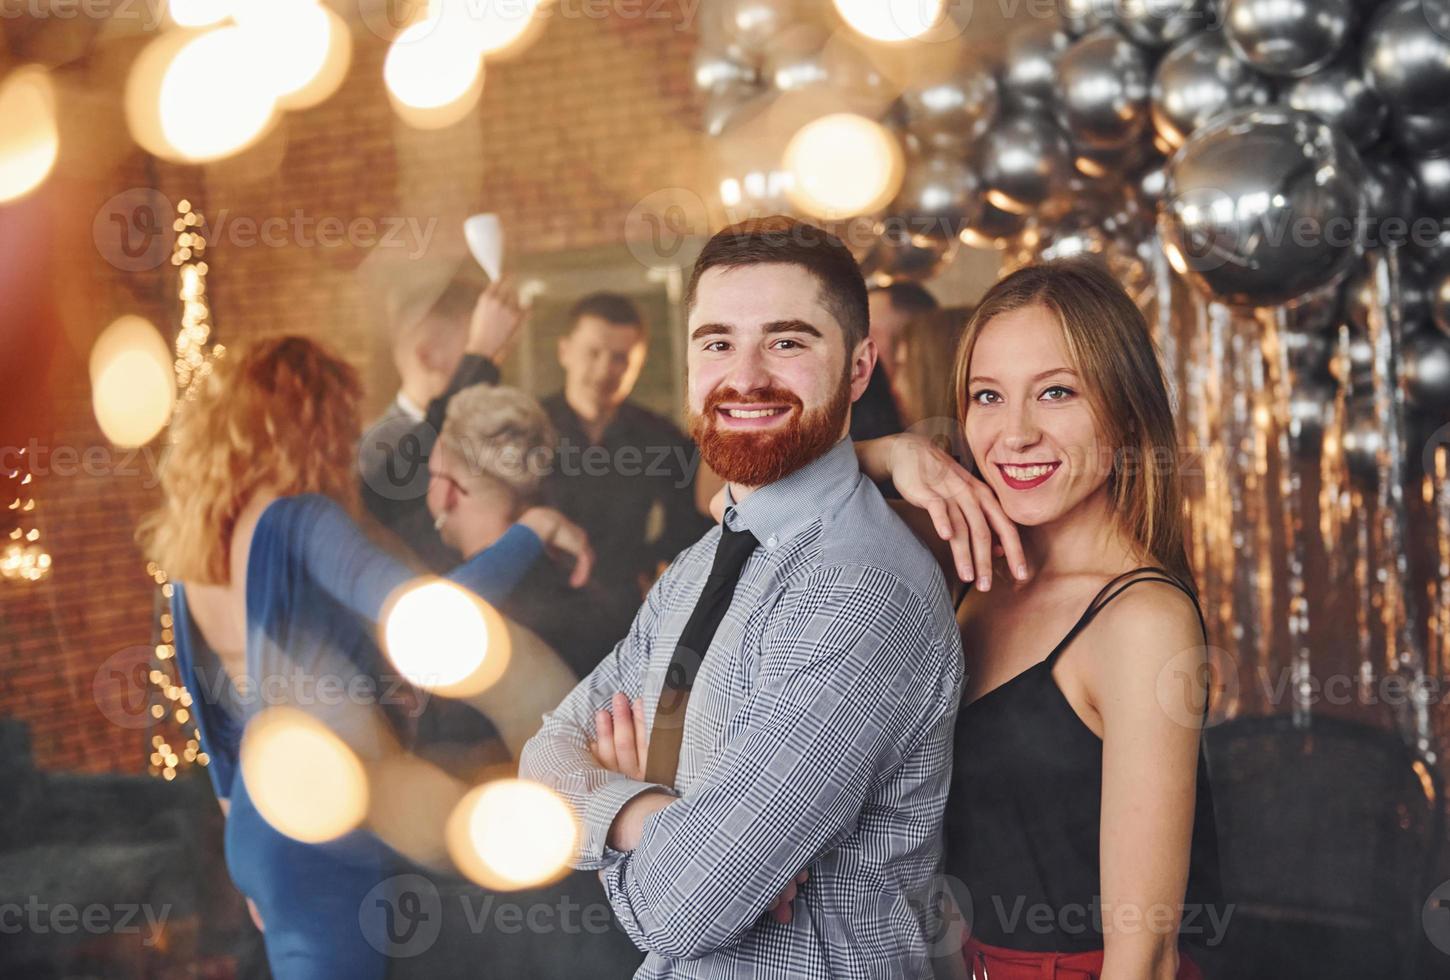 Bearded young man with his girlfriend standing together against their friends in christmas decorated room and celebrating New Year photo